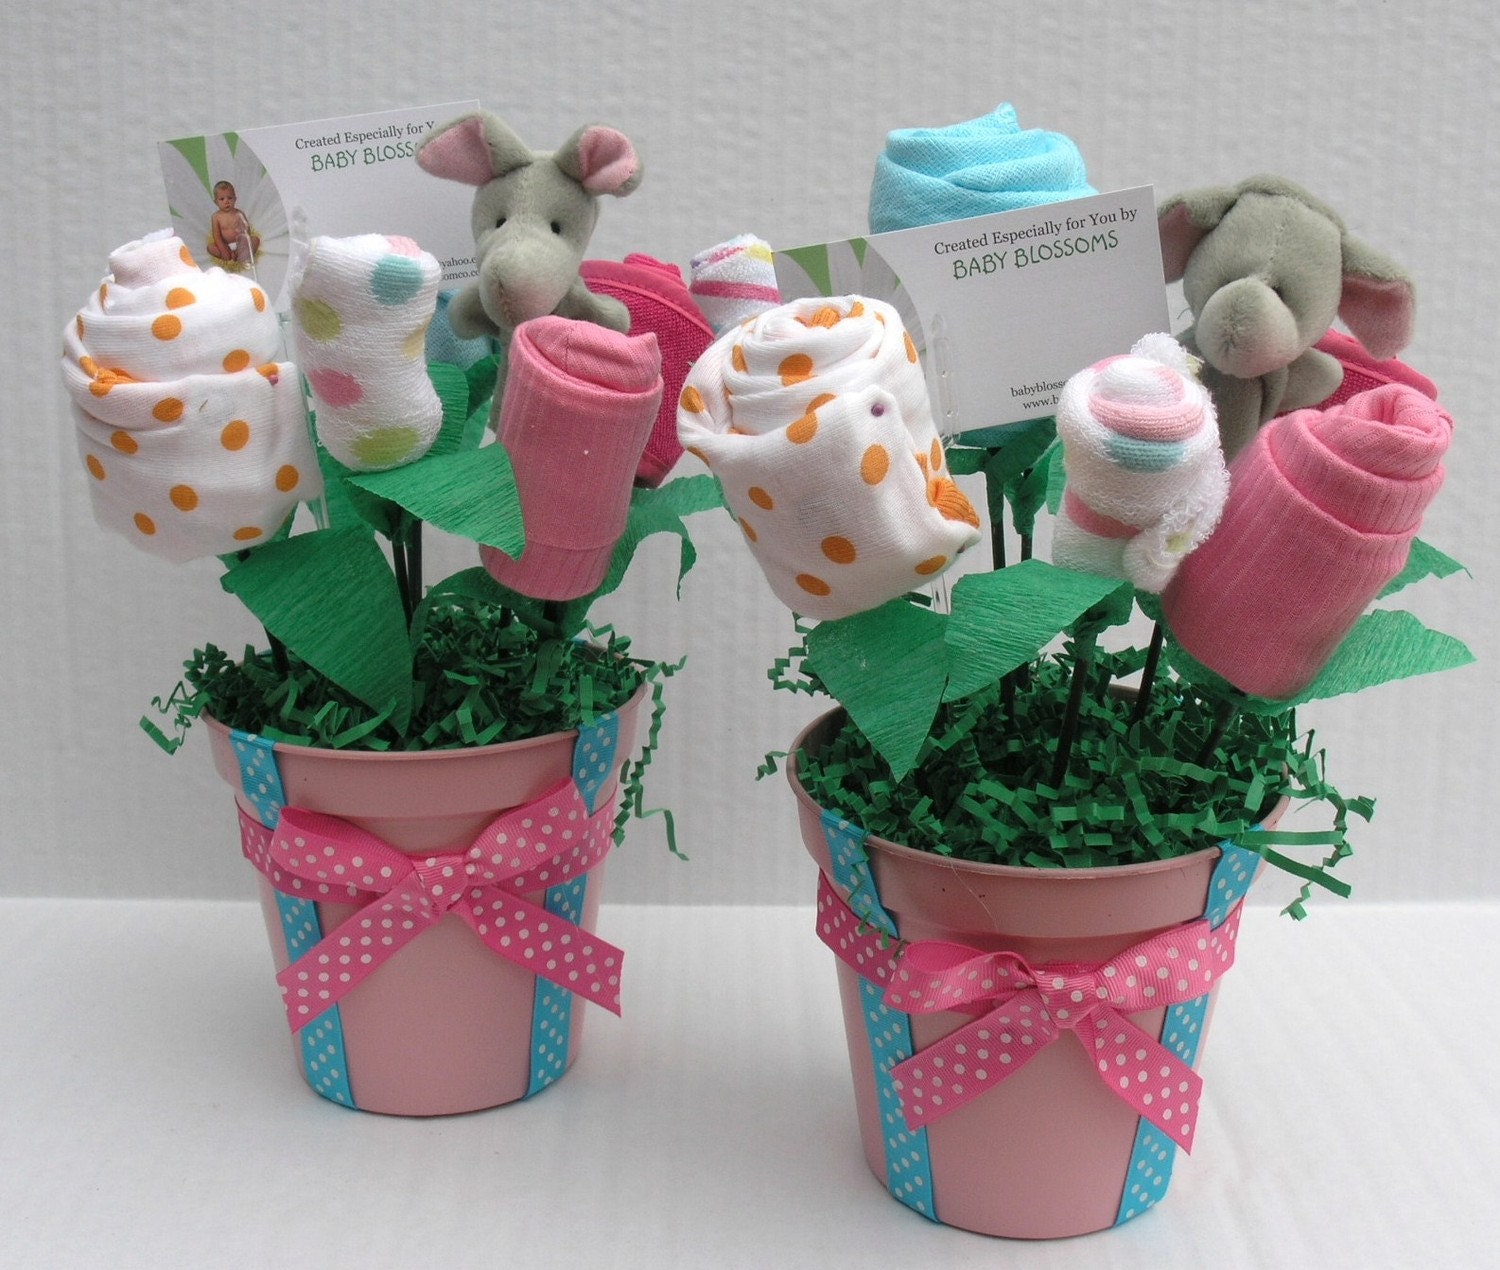 Popular items for baby bouquet set on Etsy